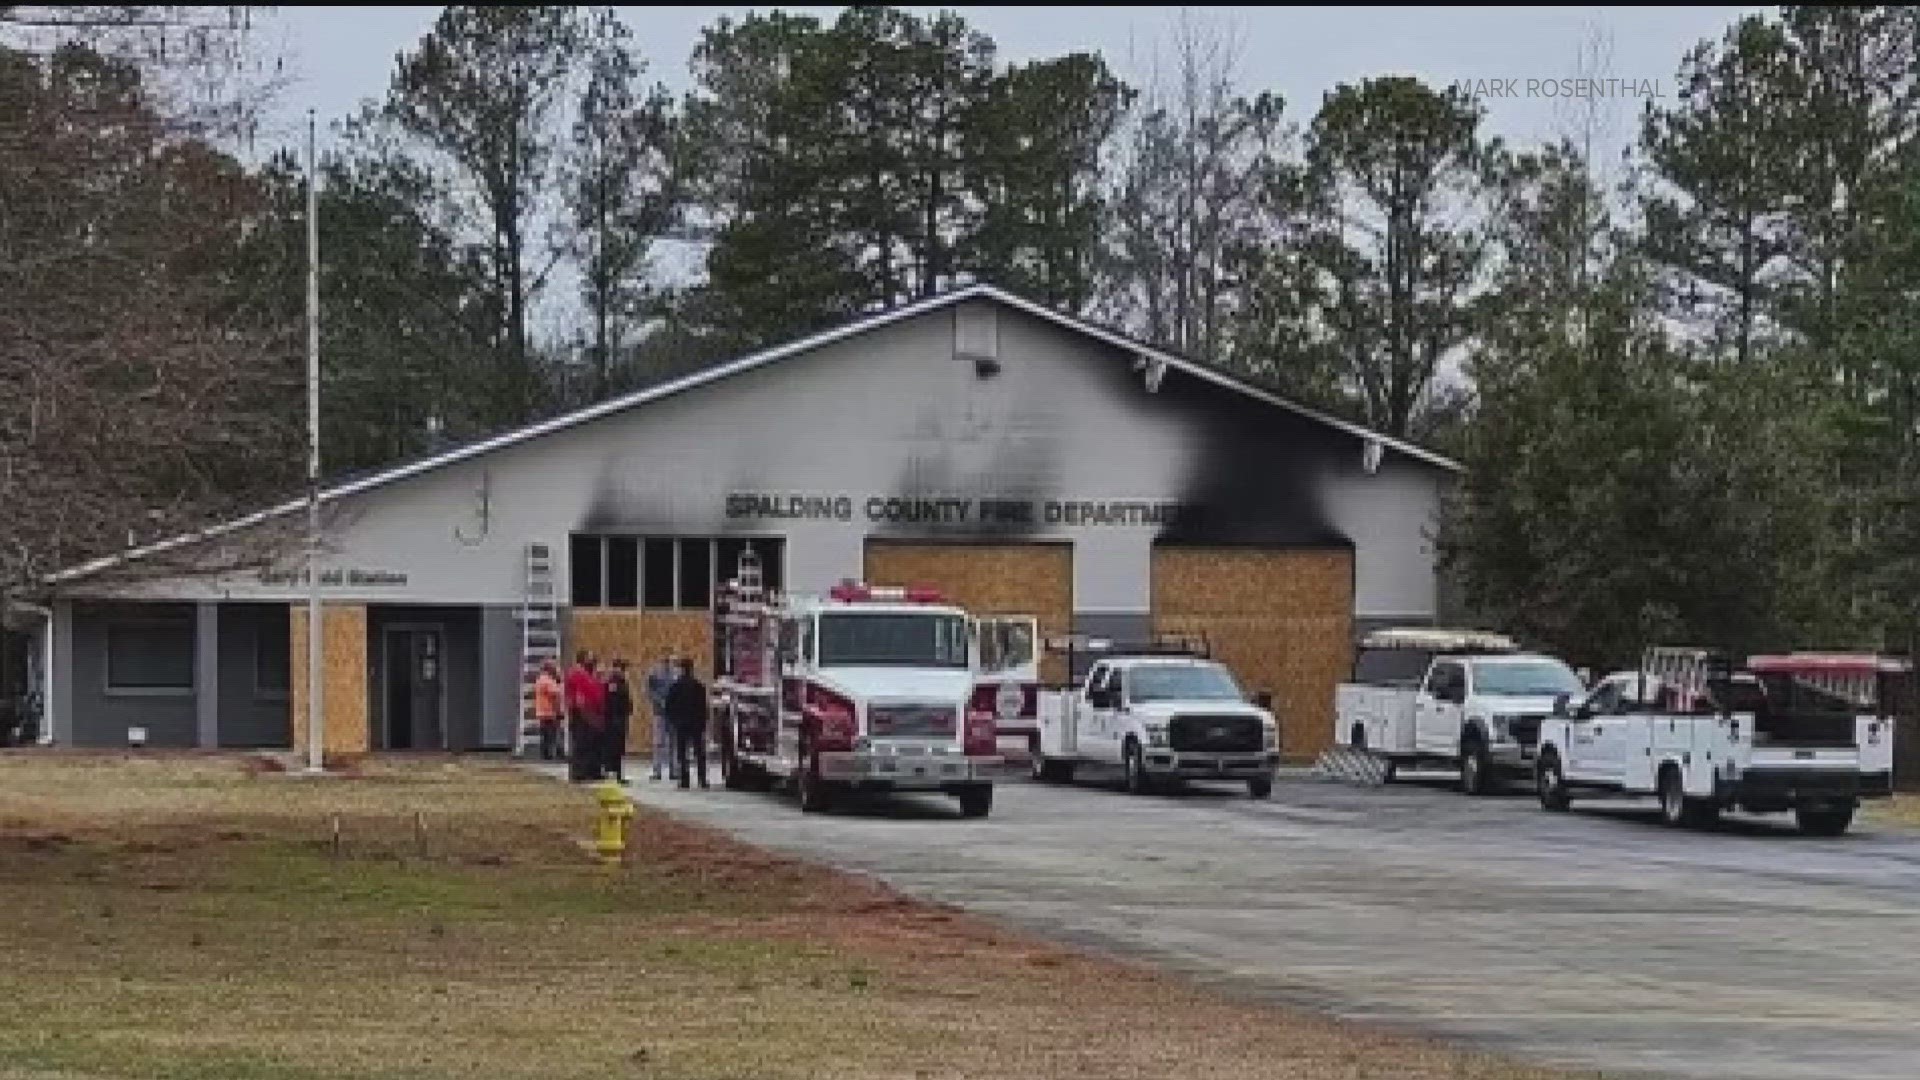 The Spalding County Fire Department is working to restore one of its stations after a ladder truck caught on fire inside the building over the weekend.